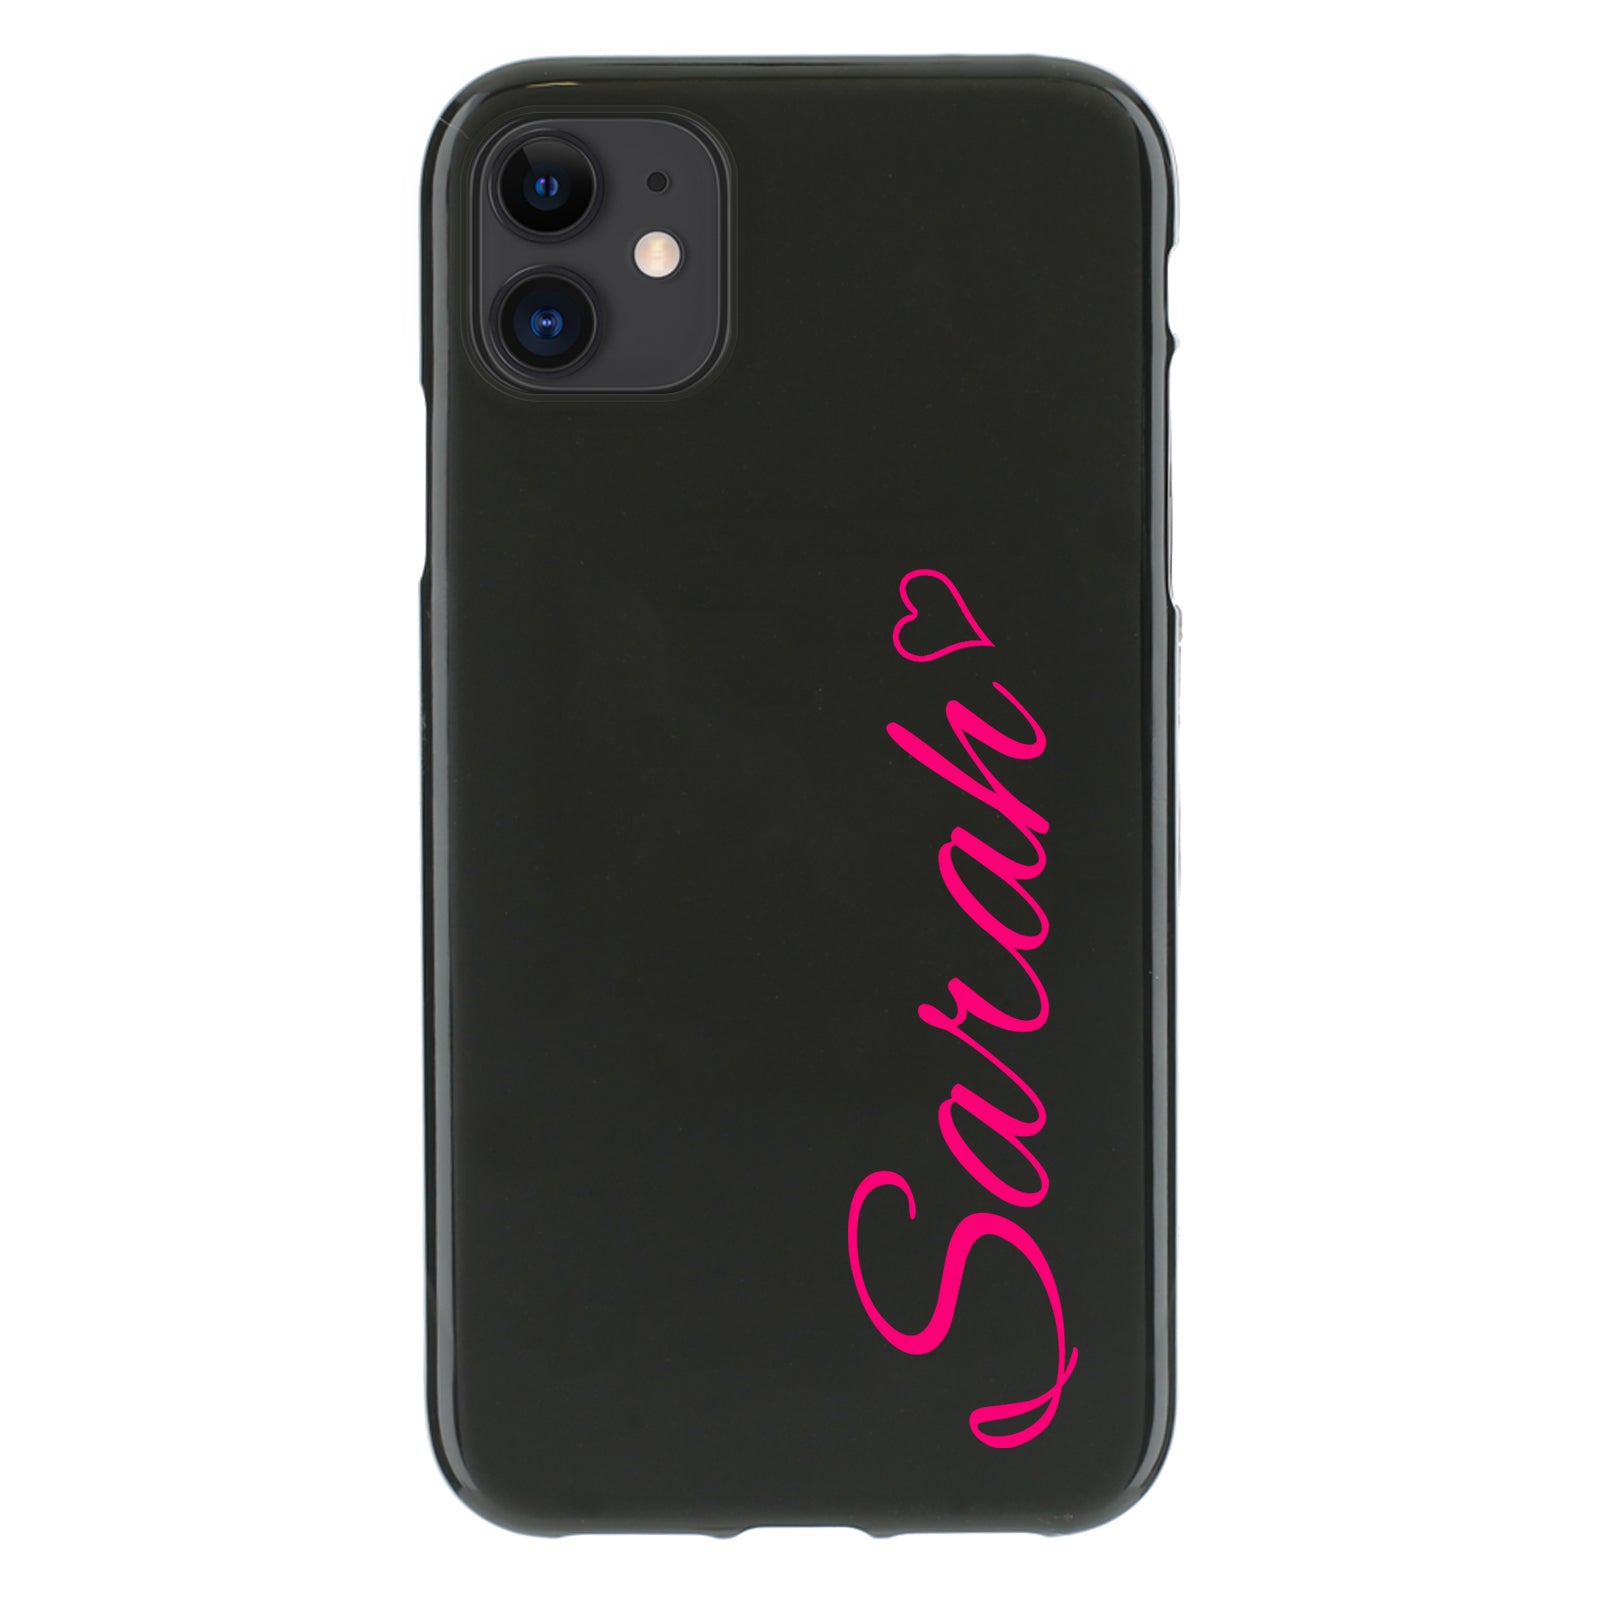 Personalised Xiaomi Phone Gel Case with Hot Pink Heart Accented Text